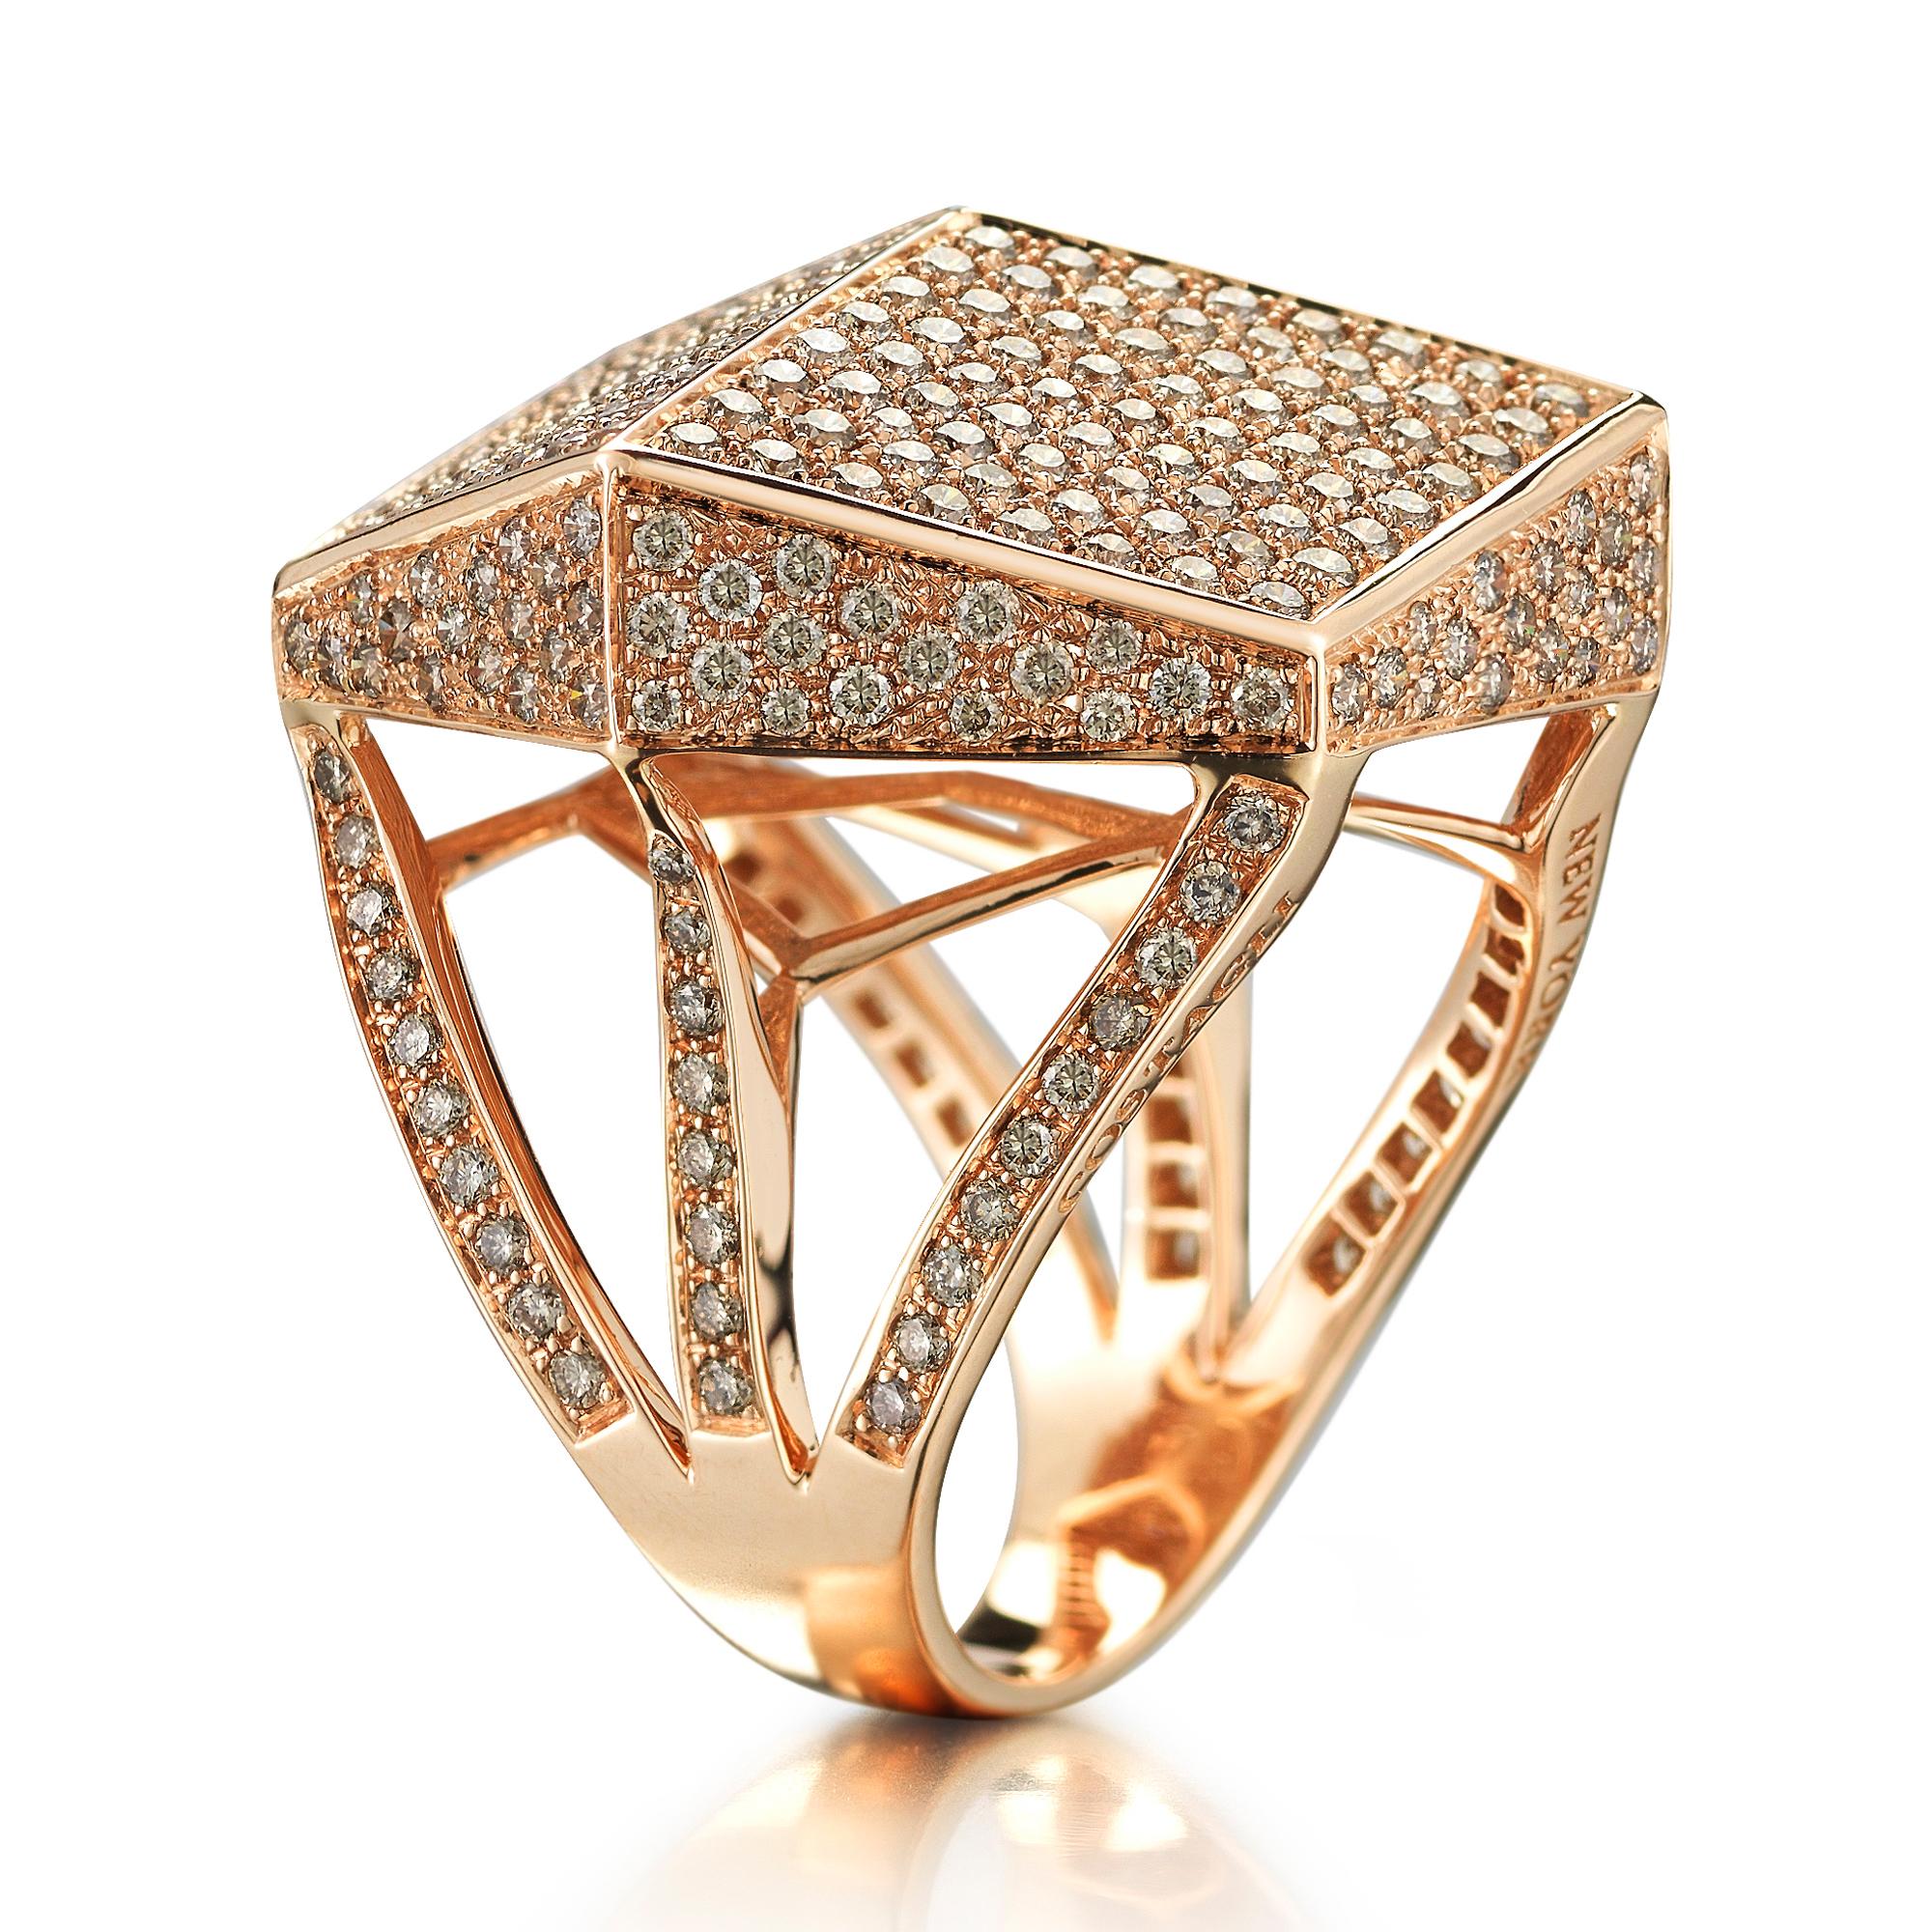 18kt rose gold Brillante® cocktail ring with pave-set champagne diamonds.

Translated from a quintessential Venetian motif, the Brillante® jewelry collection combines strong jewelry design, cutting edge technology and fine engineering.

A bracelet